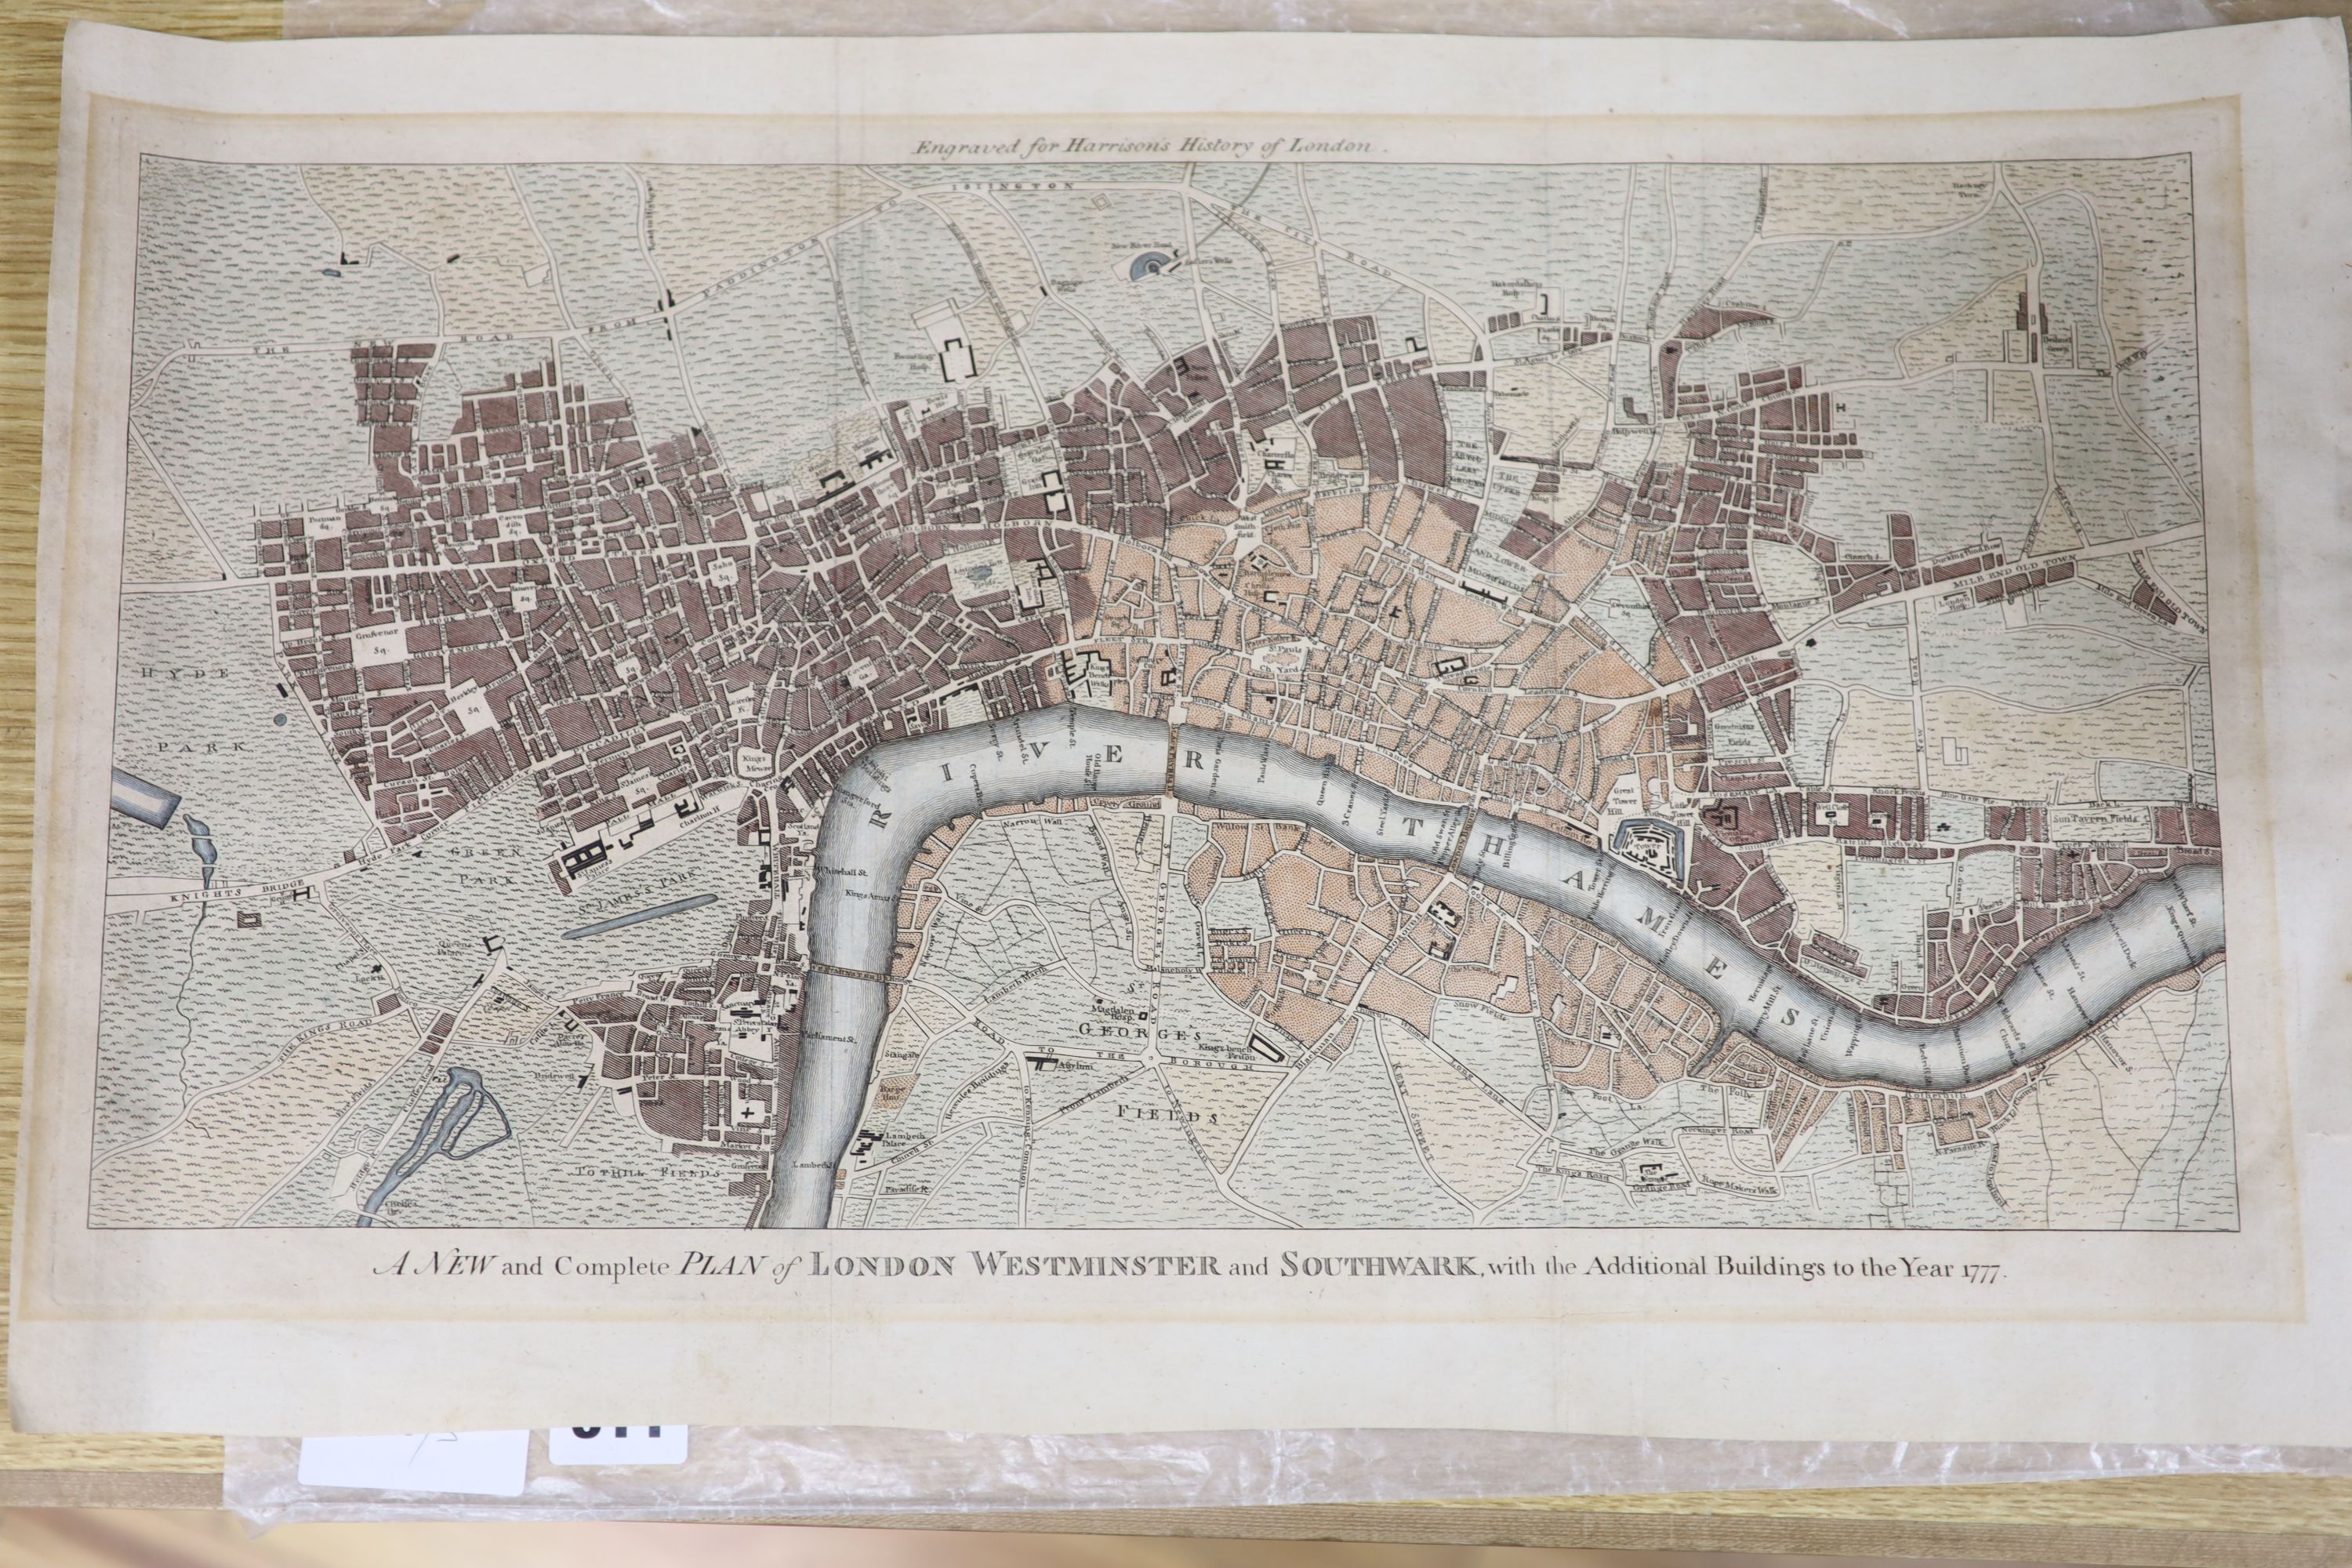 Harrison's History, coloured engraving, New and Complete Plan of London, Westminster and Southwark to the Year 1777, overall 33 x 54cm, unframed